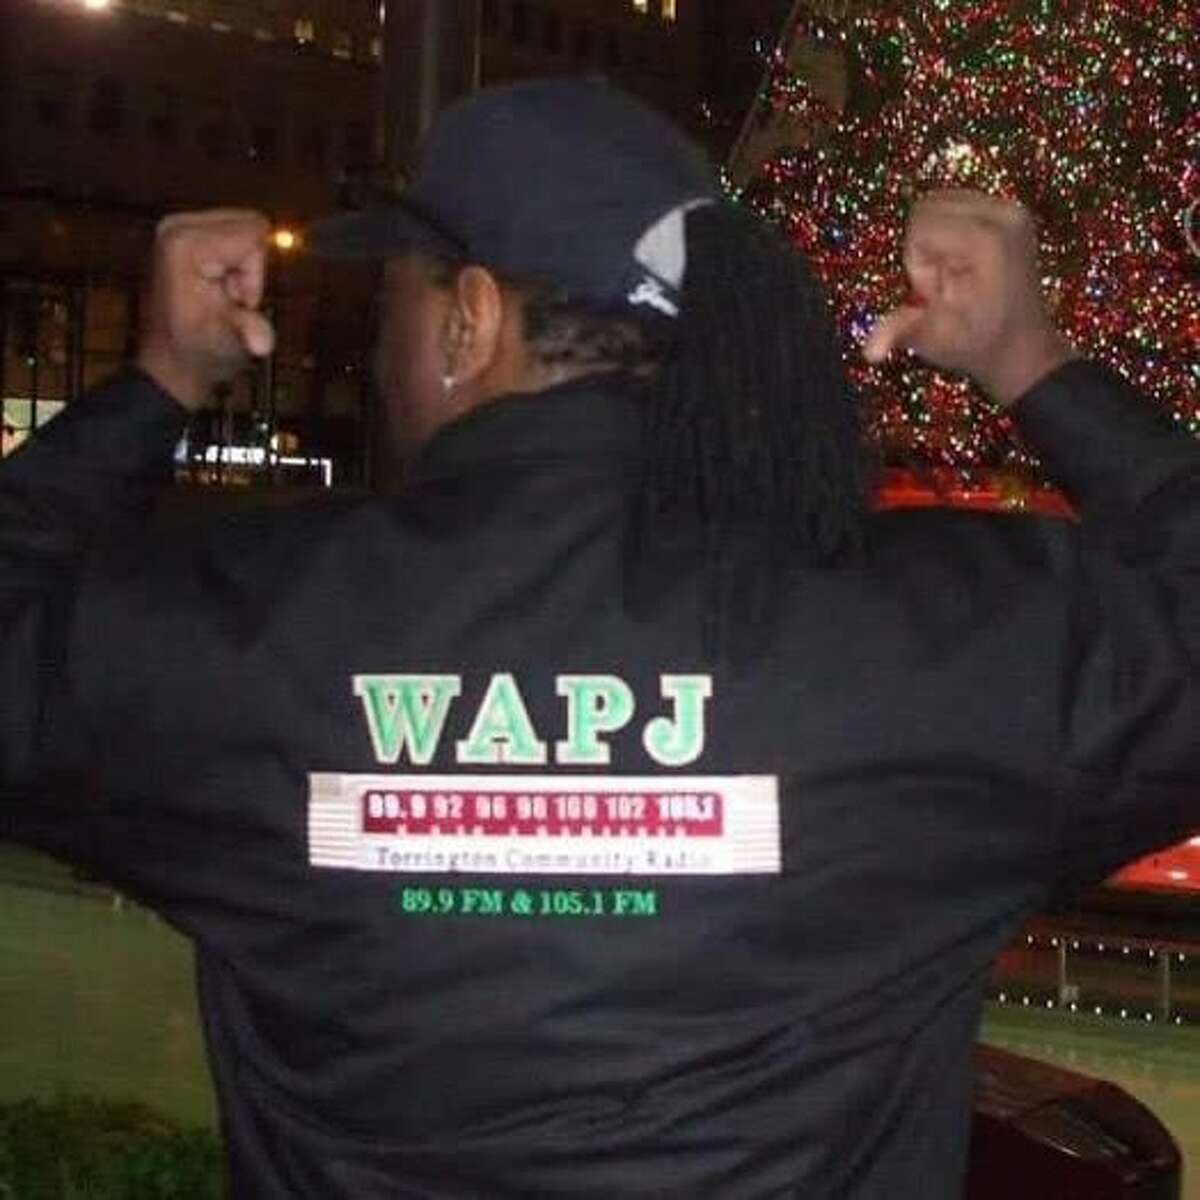 Torrington resident Jacque Williams, a singer-songwriter, is releasing “This Guy”,March 1. Half the proceeds will go to local nonprofit organizations including food banks and a local homeless shelter. Here, Williams, also a DJ with WAPJ, shows off his WAPJ jacket.